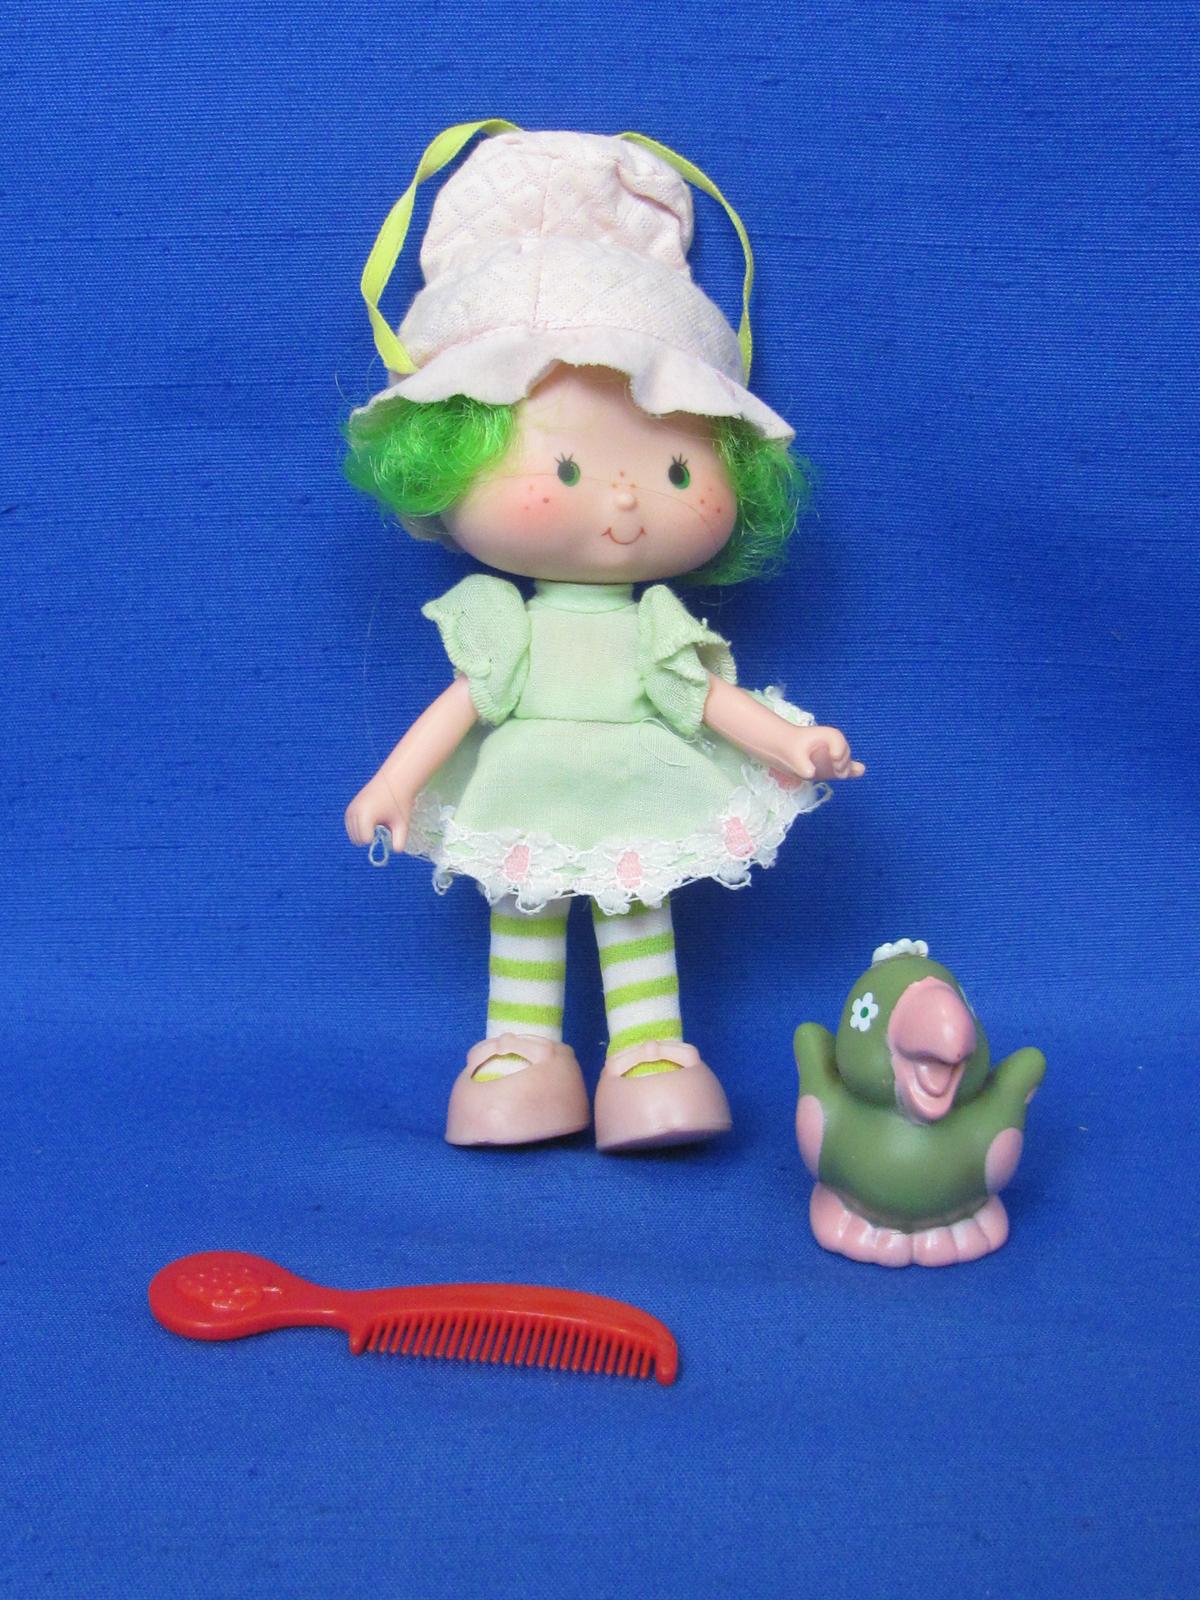 Lime Chiffon Doll with Parfait Parrot & Comb – 1980s – About 5” tall